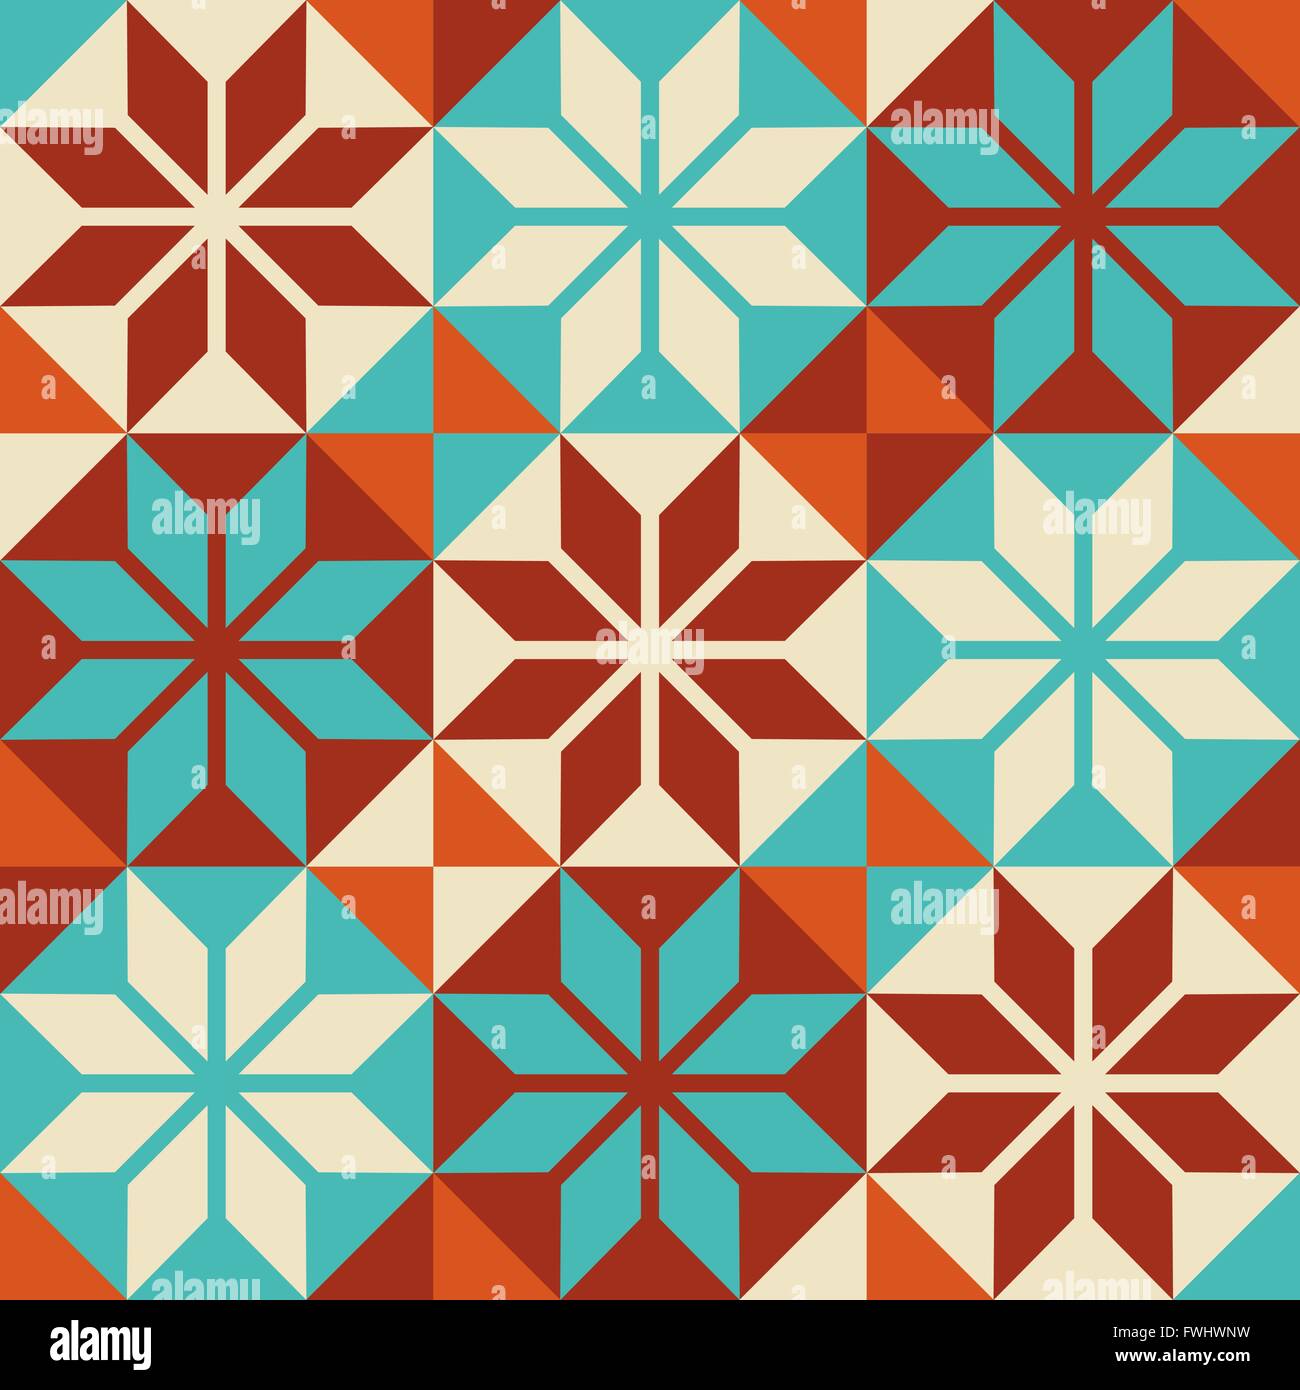 Vintage style decorative mosaic tile seamless pattern with colorful abstract geometric shapes. EPS10 vector. Stock Vector